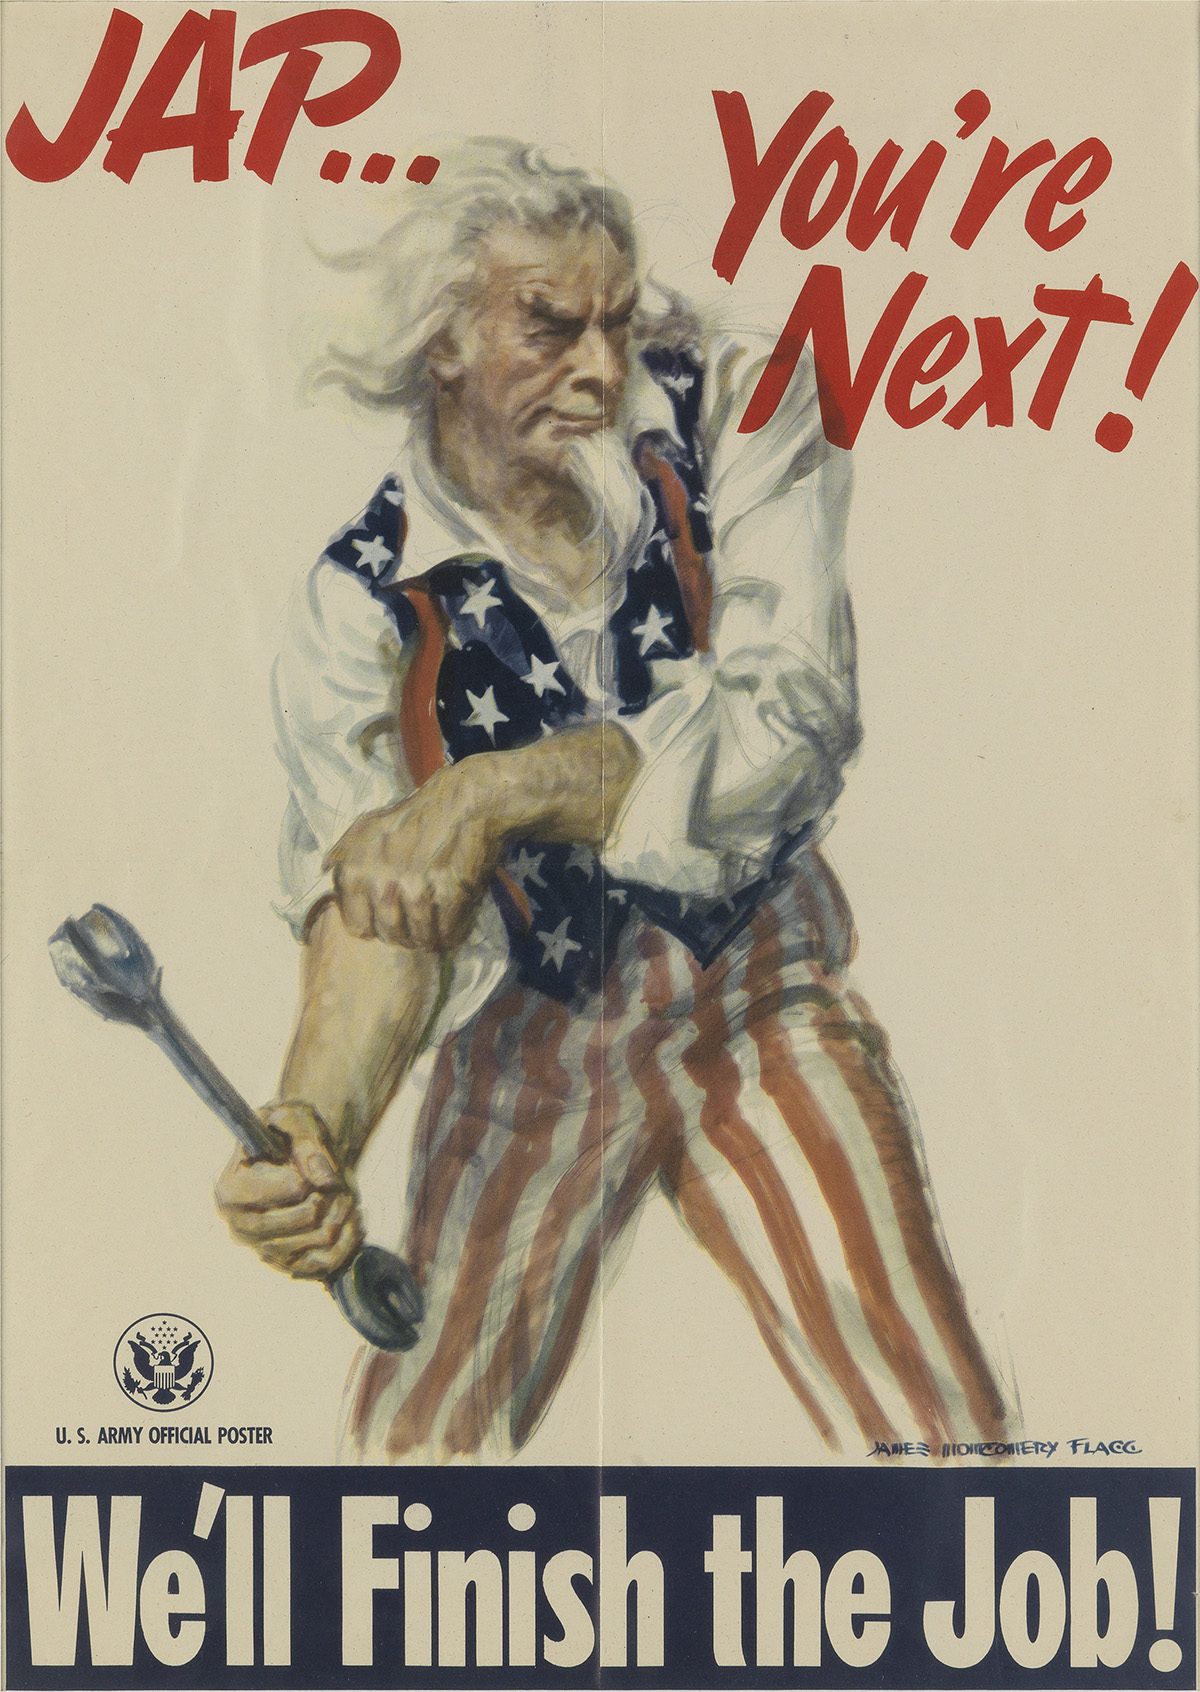 JAMES MONTGOMERY FLAGG (1870-1960). JAP . . . YOURE NEXT! / WELL FINISH THE JOB! 1945. 19x14 inches, 49x35 cm. Recruiting Publicity B